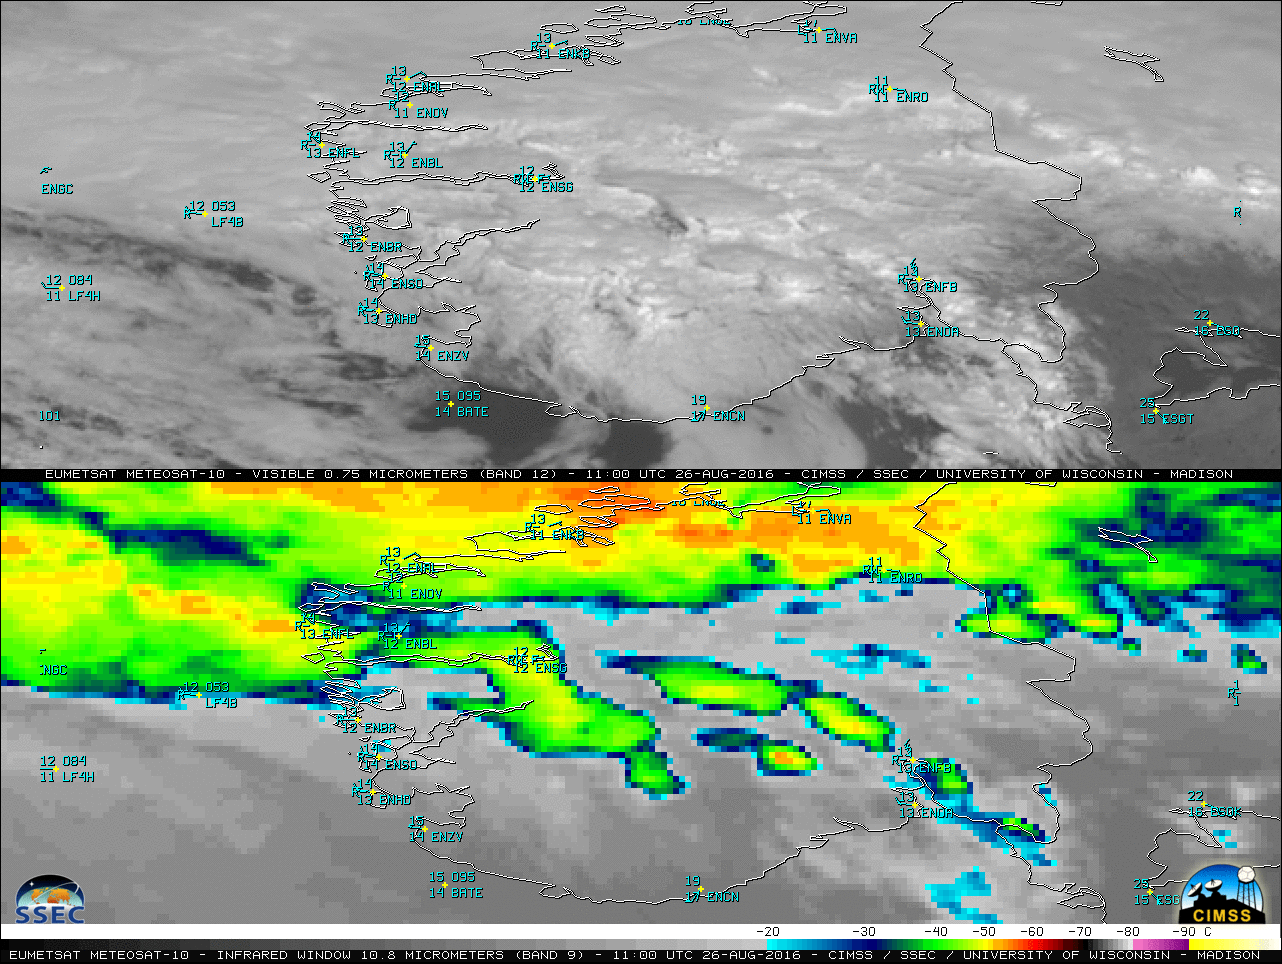 Meteosat-10 Visible (0.75 µm, top) and Infrared Window (10.8 µm, bottom) images, with surface reports plotted in cyan [click to play animation]